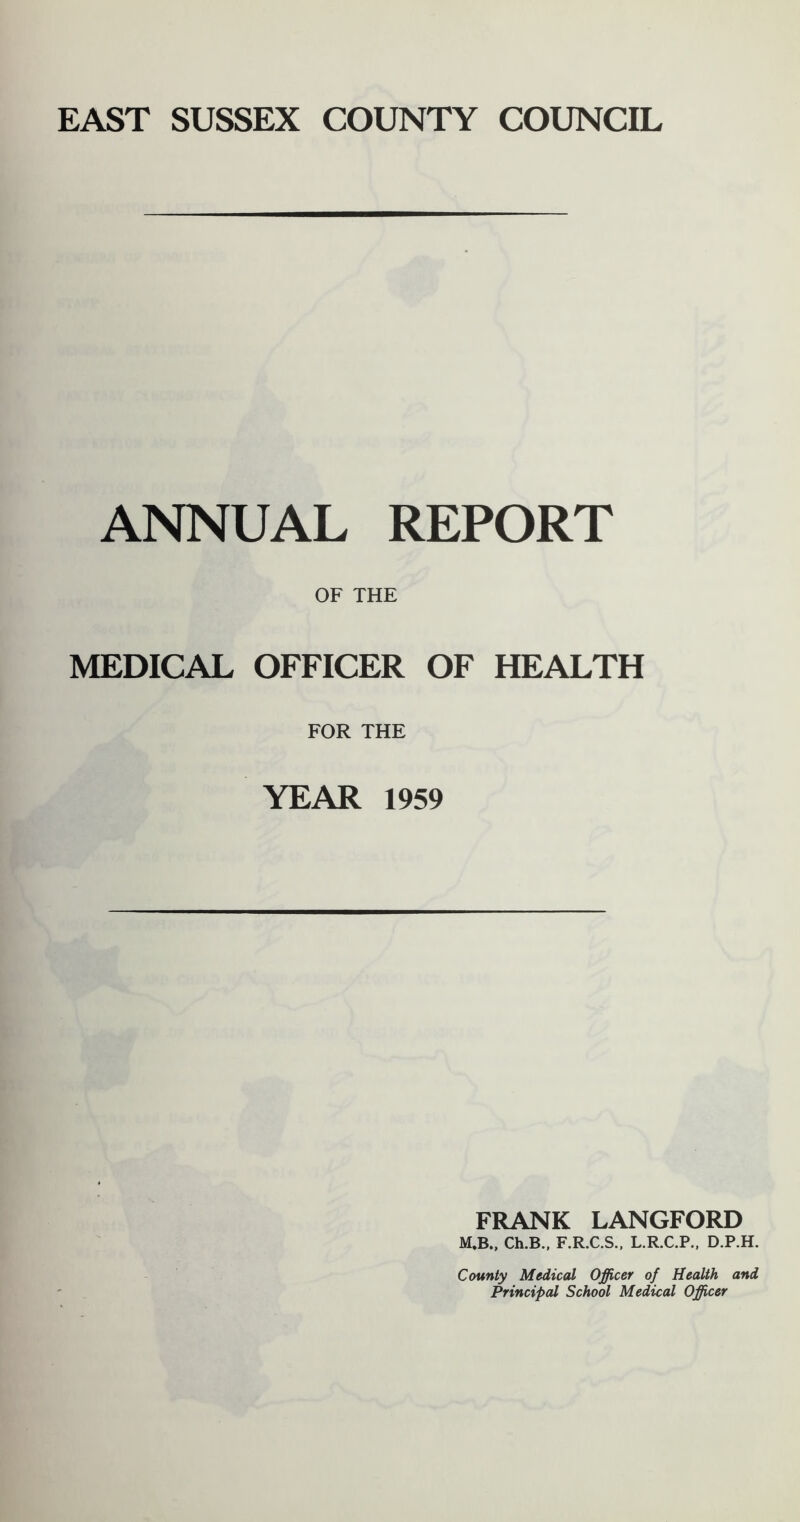 ANNUAL REPORT OF THE MEDICAL OFFICER OF HEALTH FOR THE YEAR 1959 FRANK LANGFORD M.B., Ch.B., F.R.C.S.. L.R.C.P., D.P.H. County Medical Officer of Health and Principal School Medical Officer